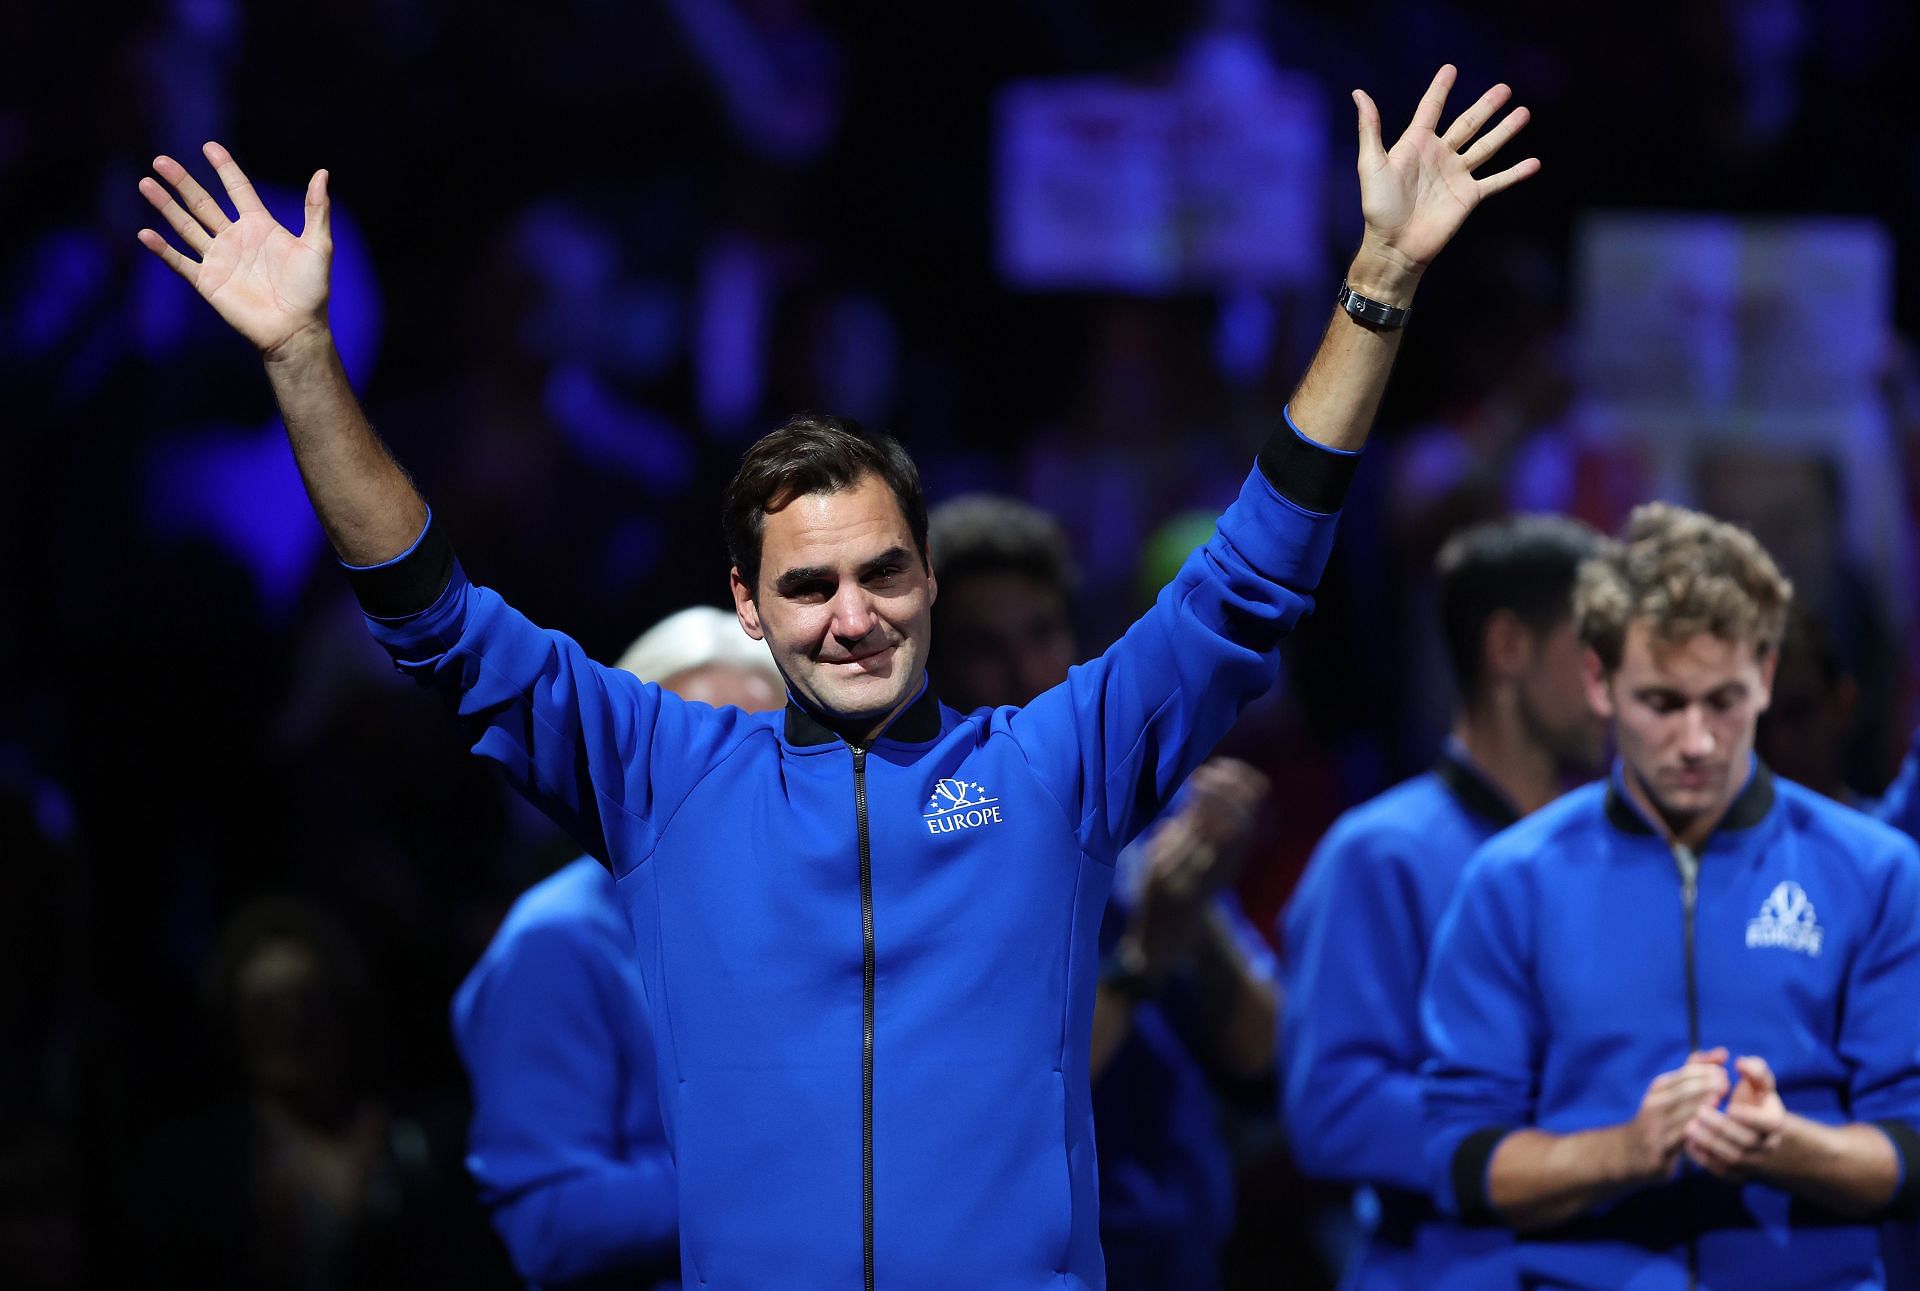 Roger Federer acknowledges the crowd at the 2022 Laver Cup 2022.